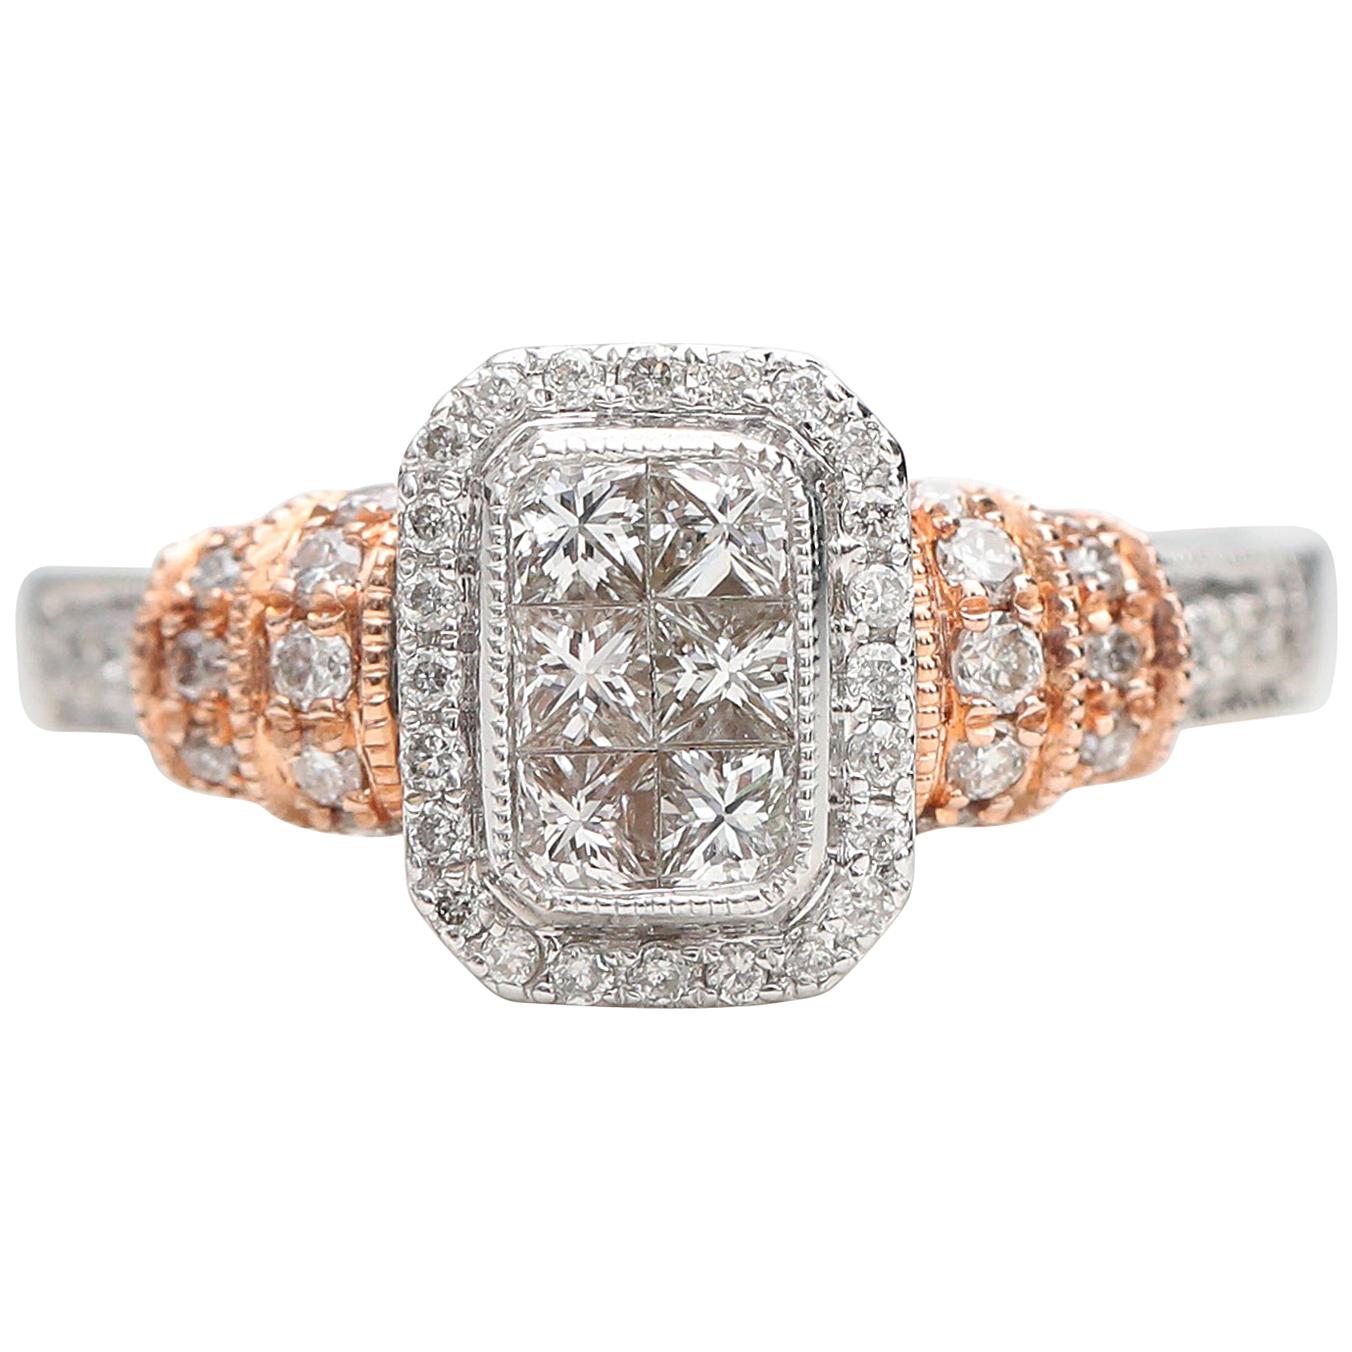 1 Carat Diamond Engagement Ring 14 Karat Two-Tone White and Rose Gold For Sale